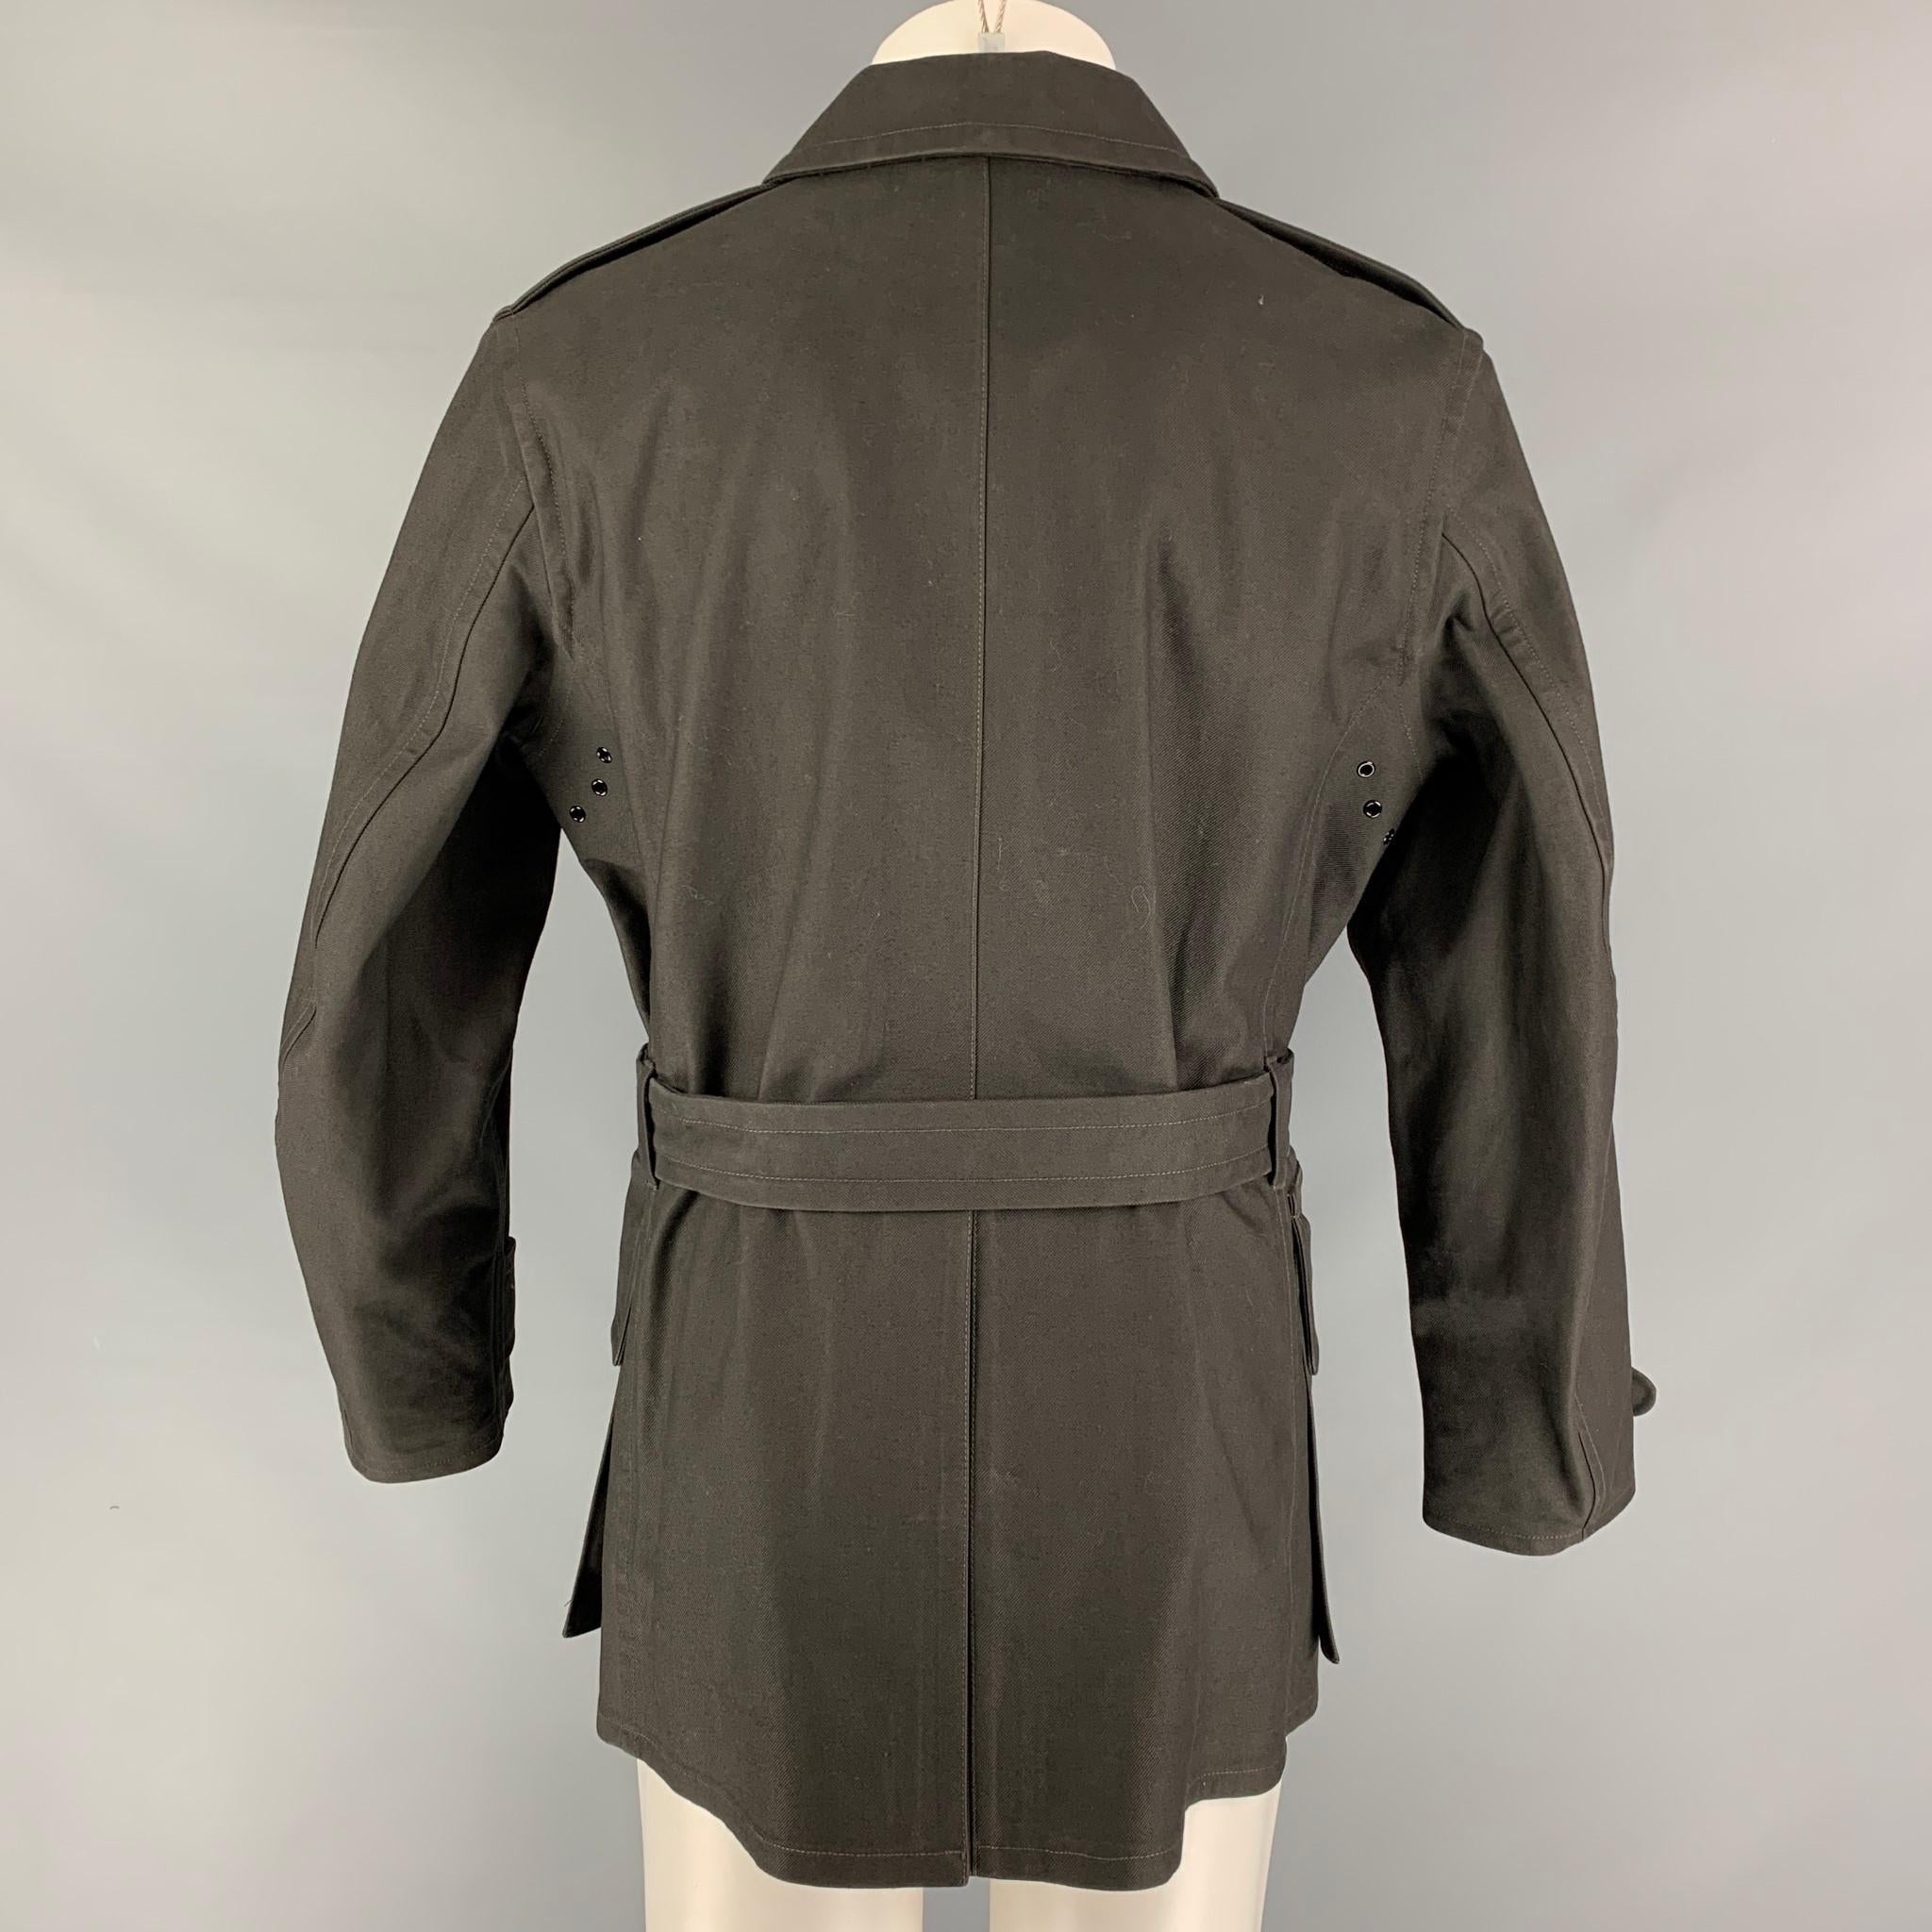 RRL by RALPH LAUREN coat comes in a olive cotton with a plaid liner featuring contrast stitching, patch pockets, belted, and a buttoned closure. 

Very Good Pre-Owned Condition.
Marked: M

Measurements:

Shoulder: 18 in.
Chest: 44 in.
Sleeve: 24.5